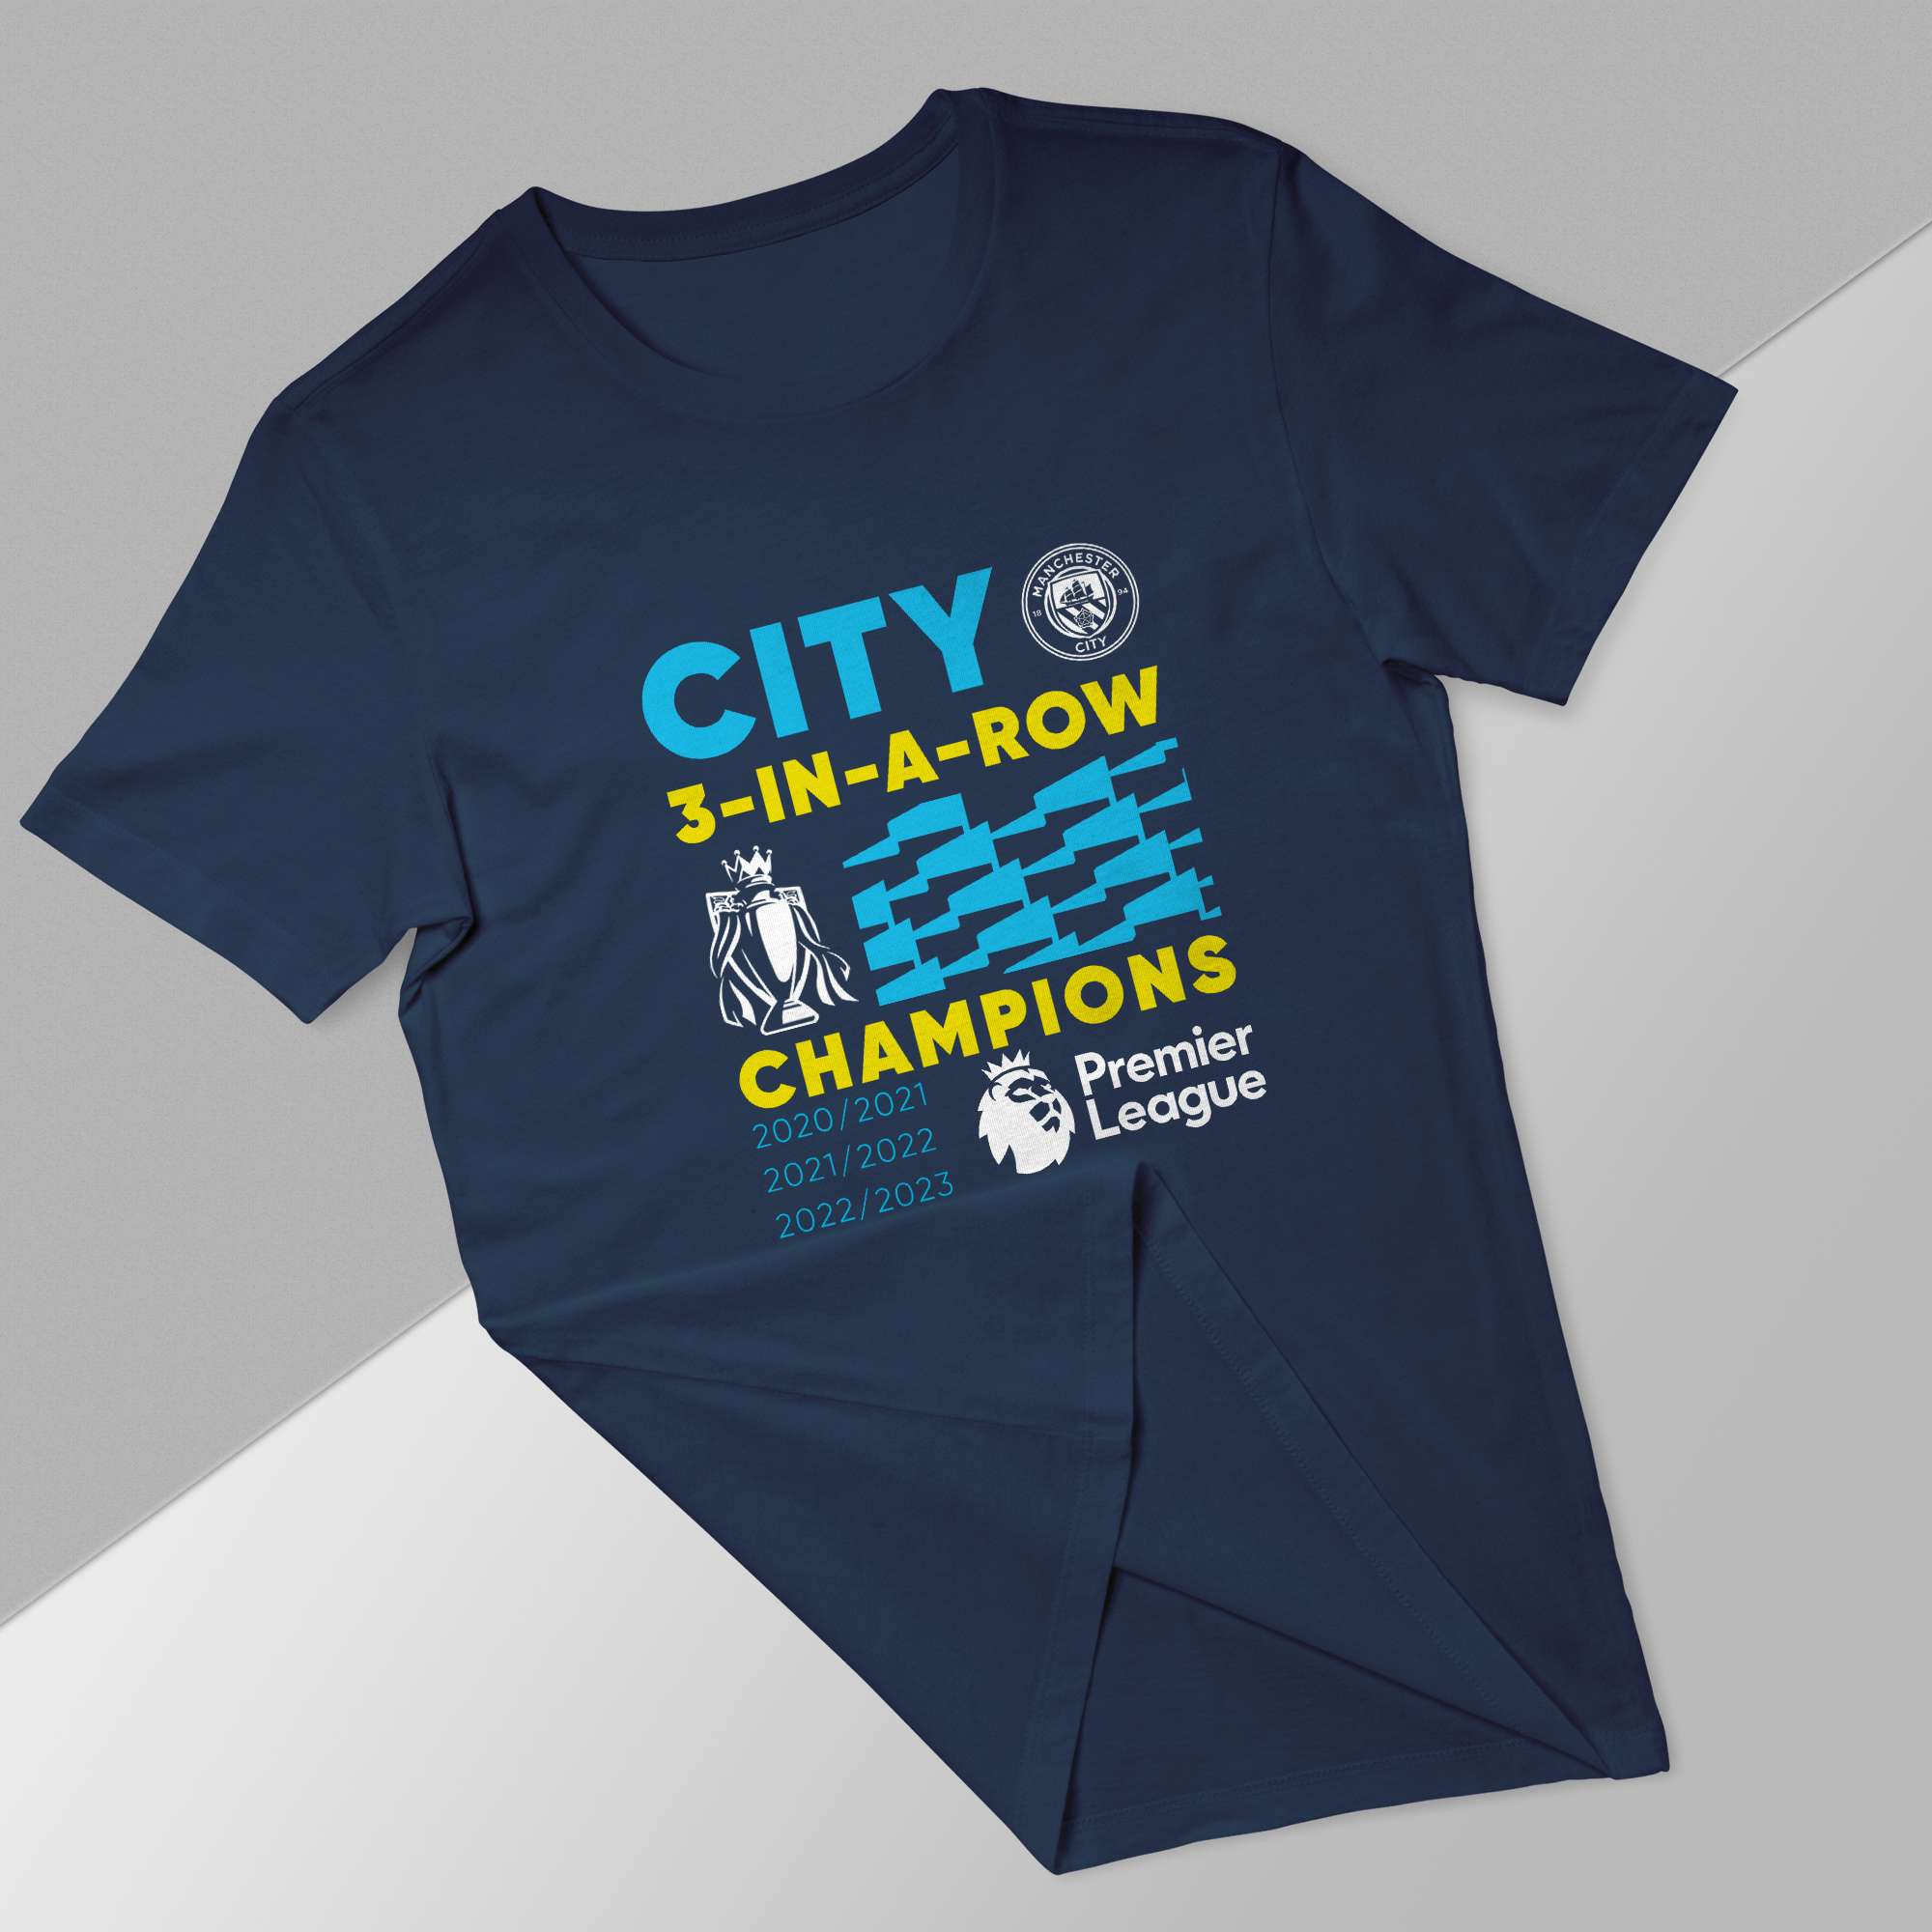 Manchester City 22/23 Premier League Champions Tee - thejerseyarena